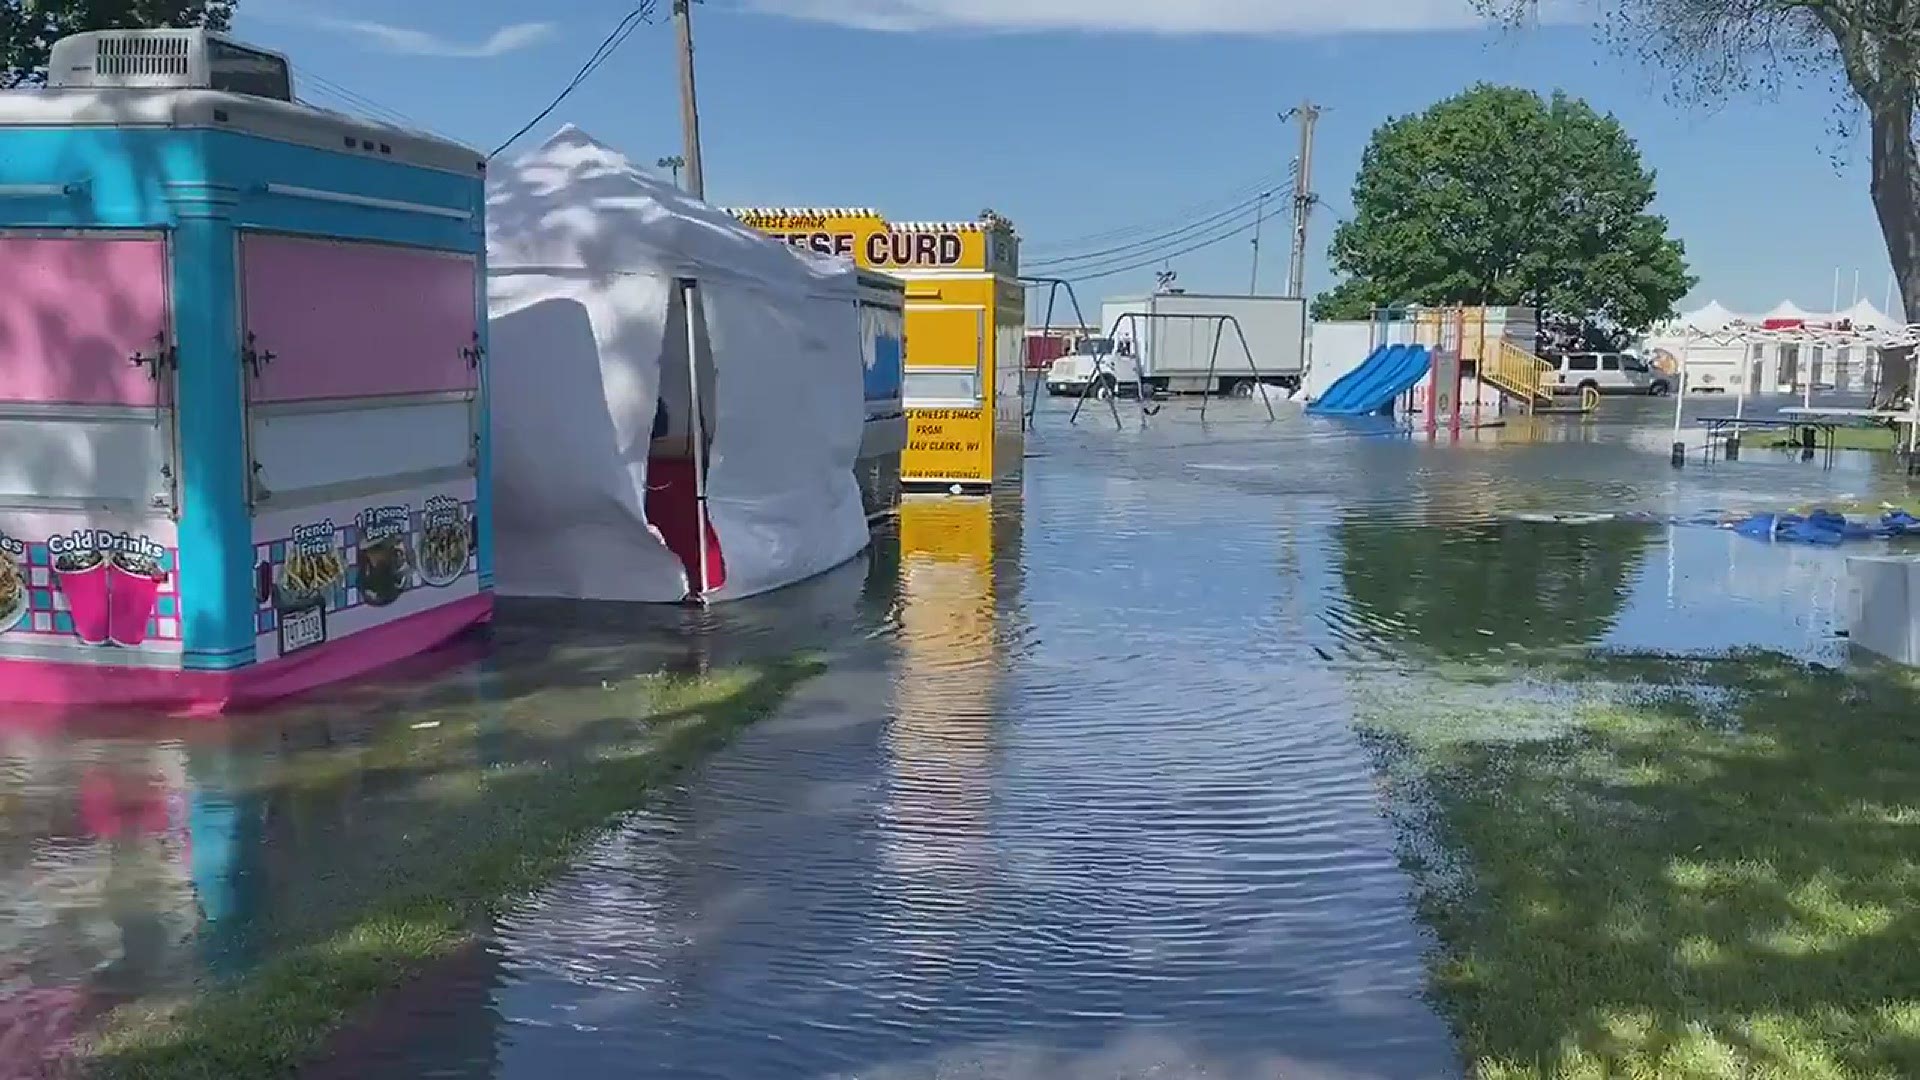 With Waterworks Park still flooded after Friday's rainfall, organizers of the Walleye Festival have made the decision to postpone events until Thursday, June 3.